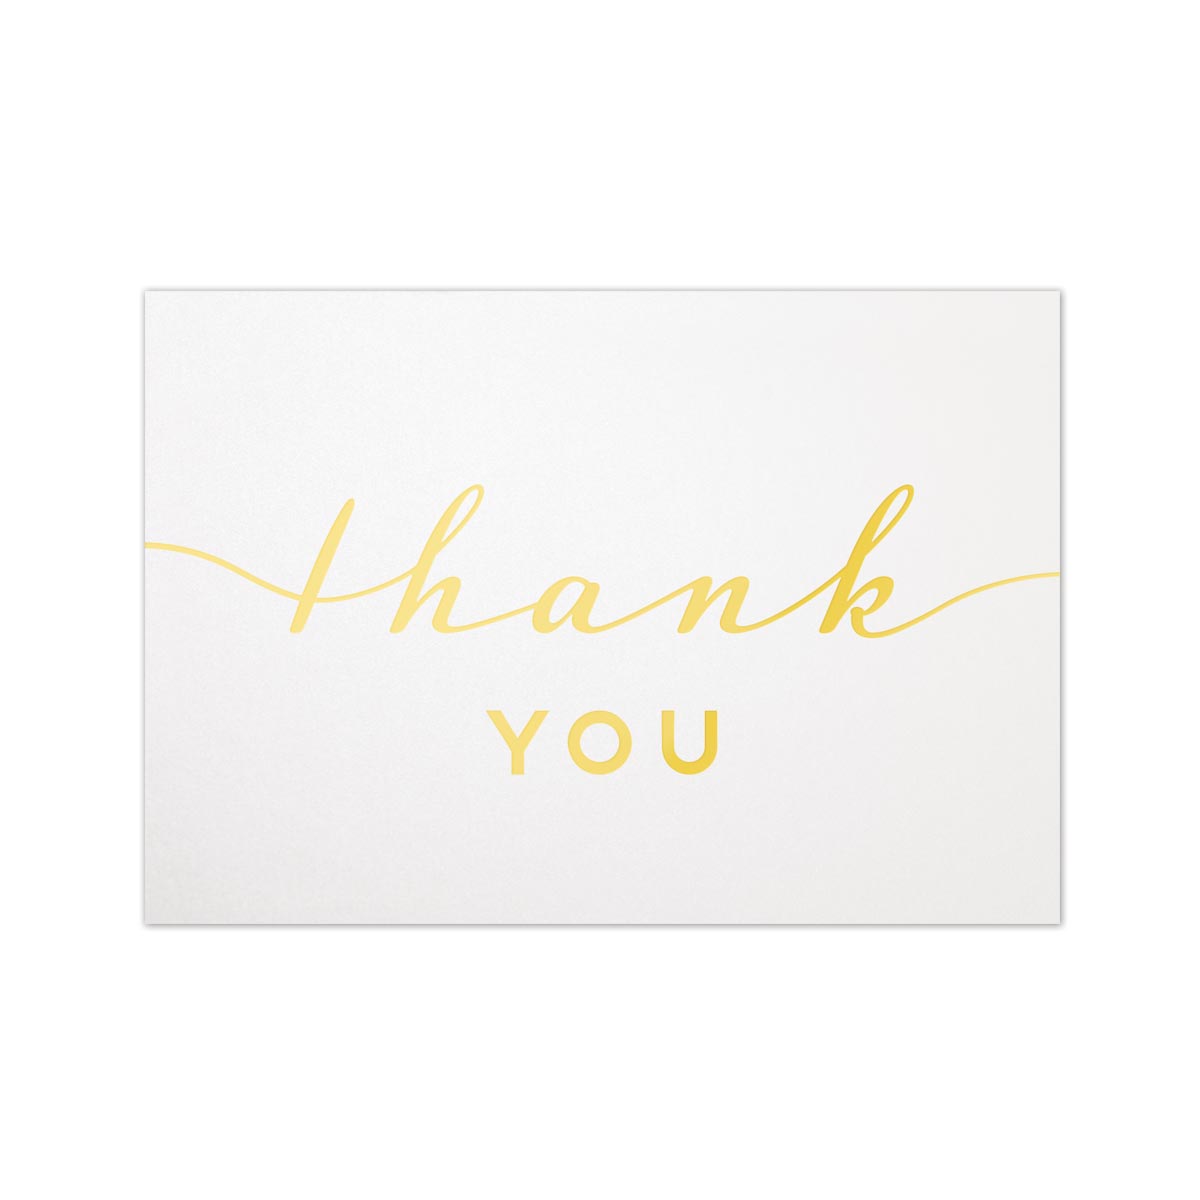 Simple gold foil thank you design on a subtle sparkling white paper stock